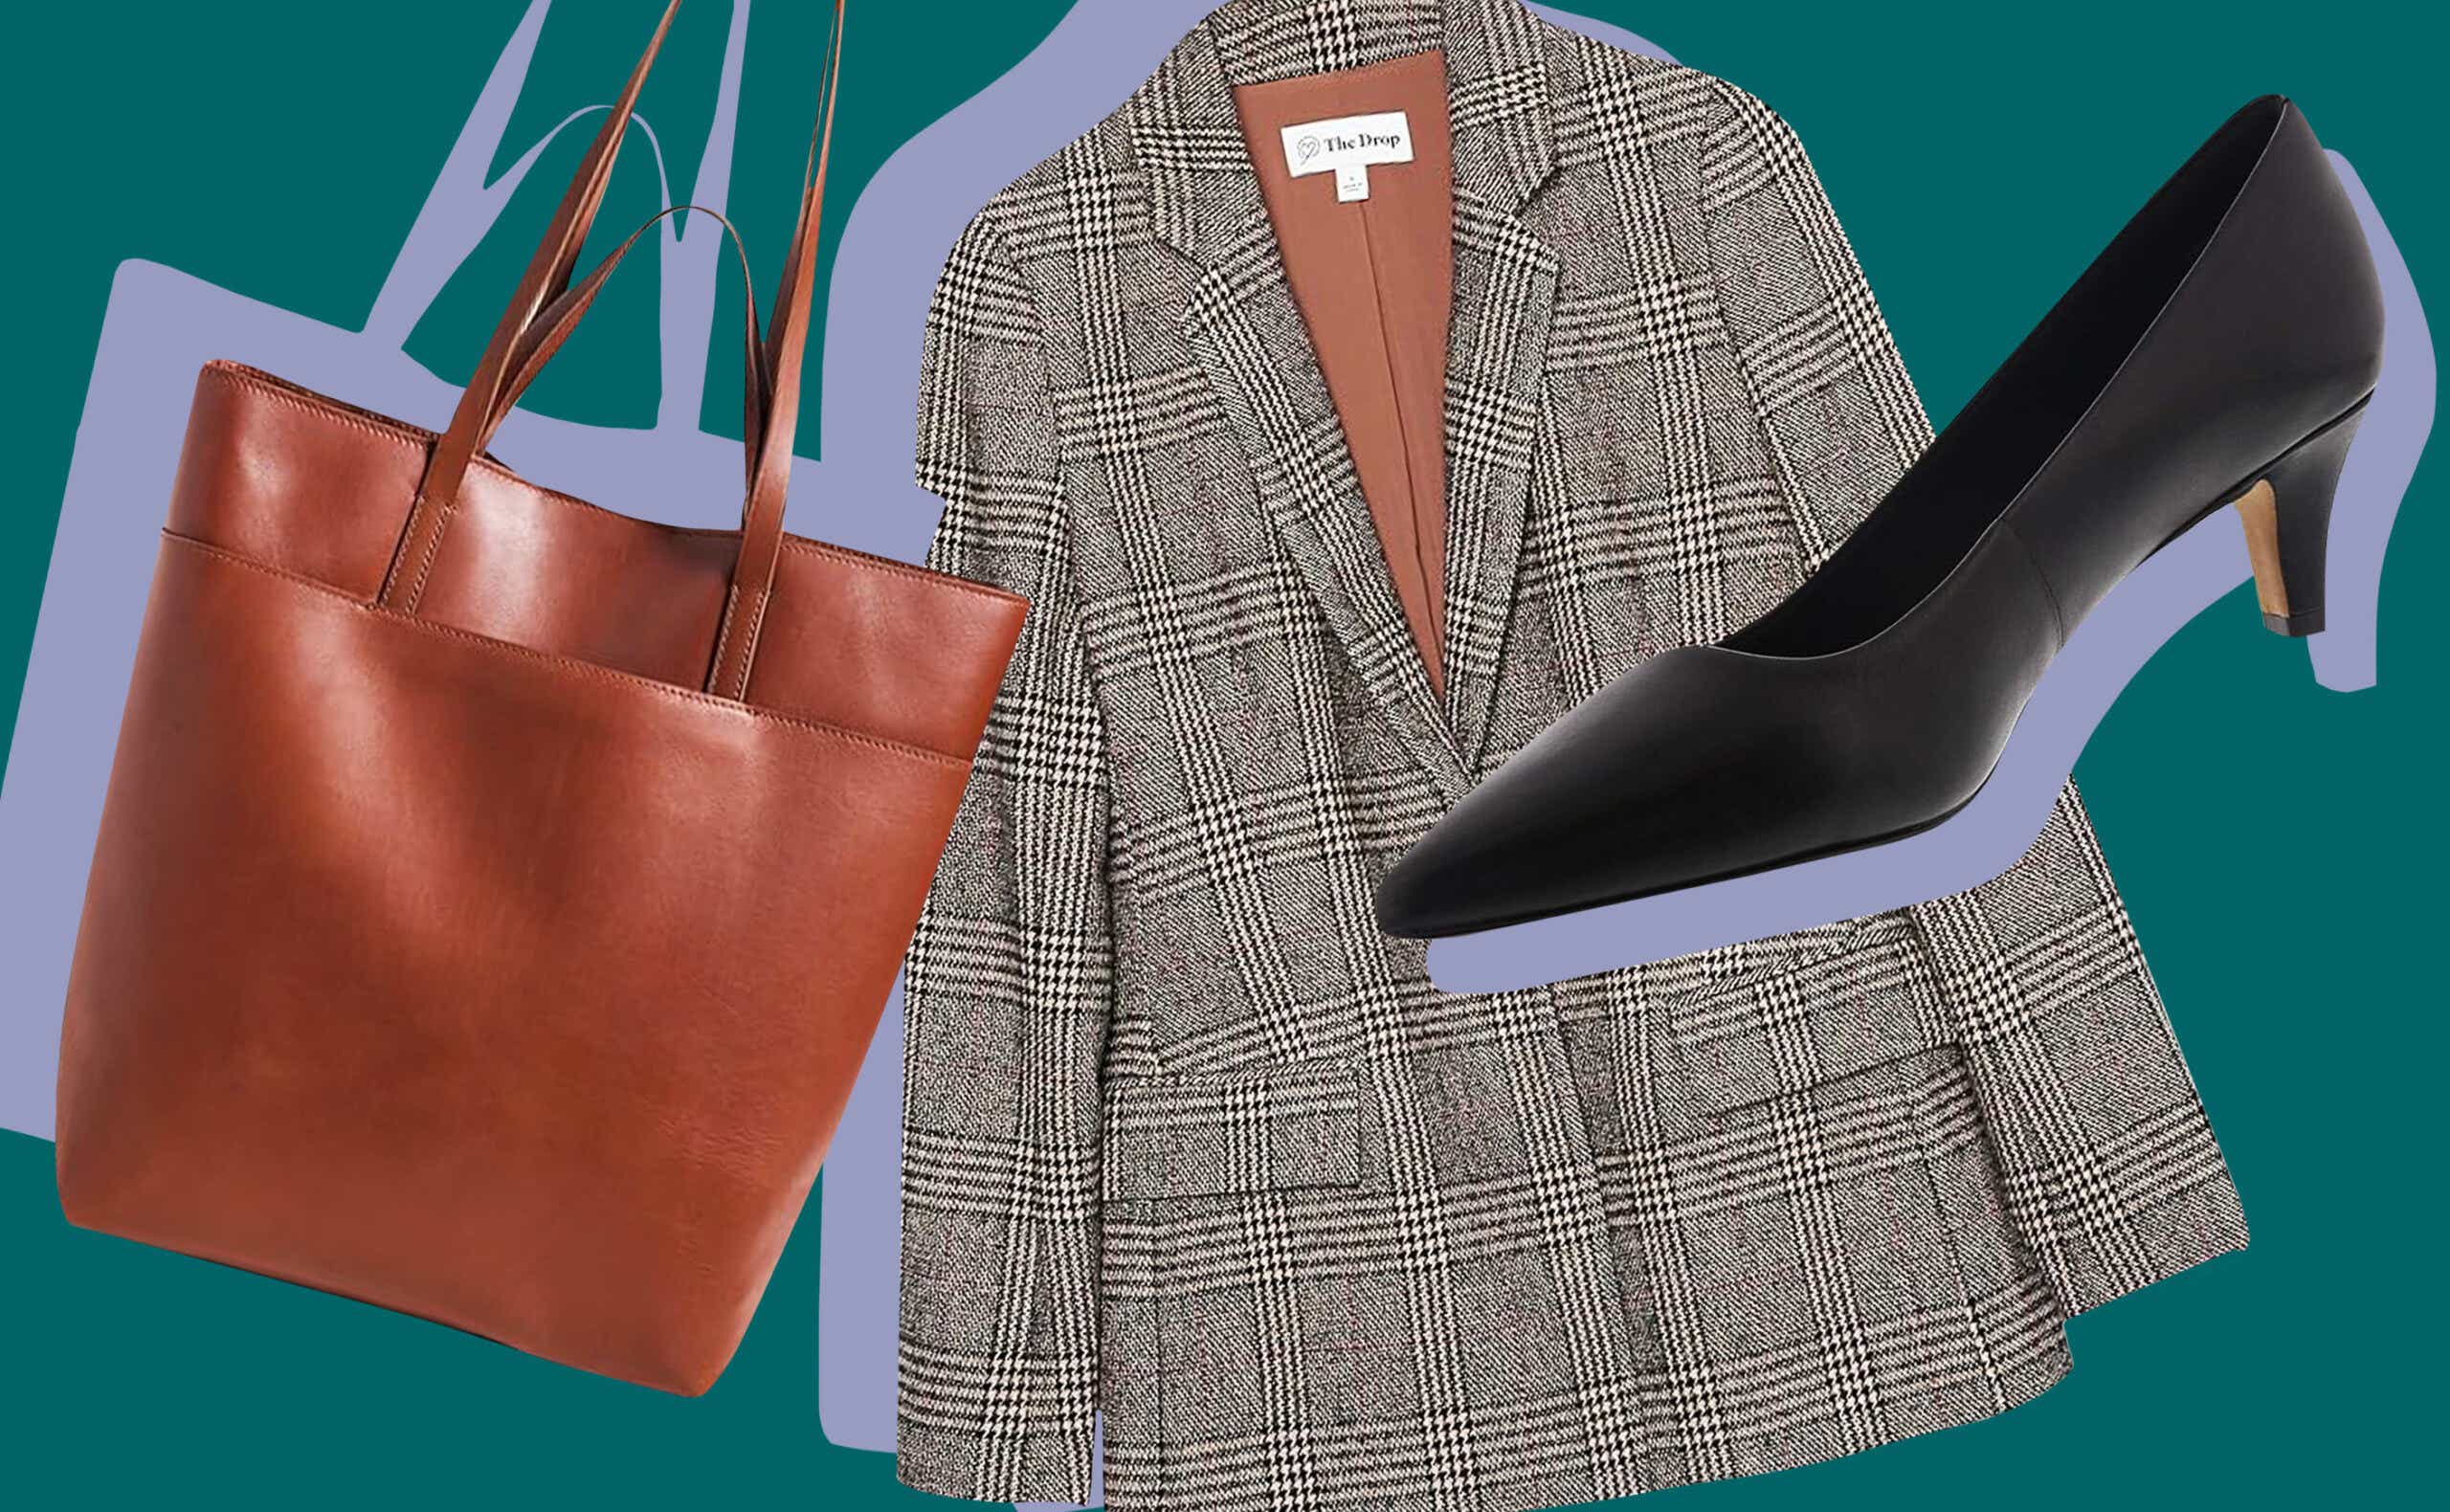 Wardrobe essentials: staples for women over 40 - 40+style